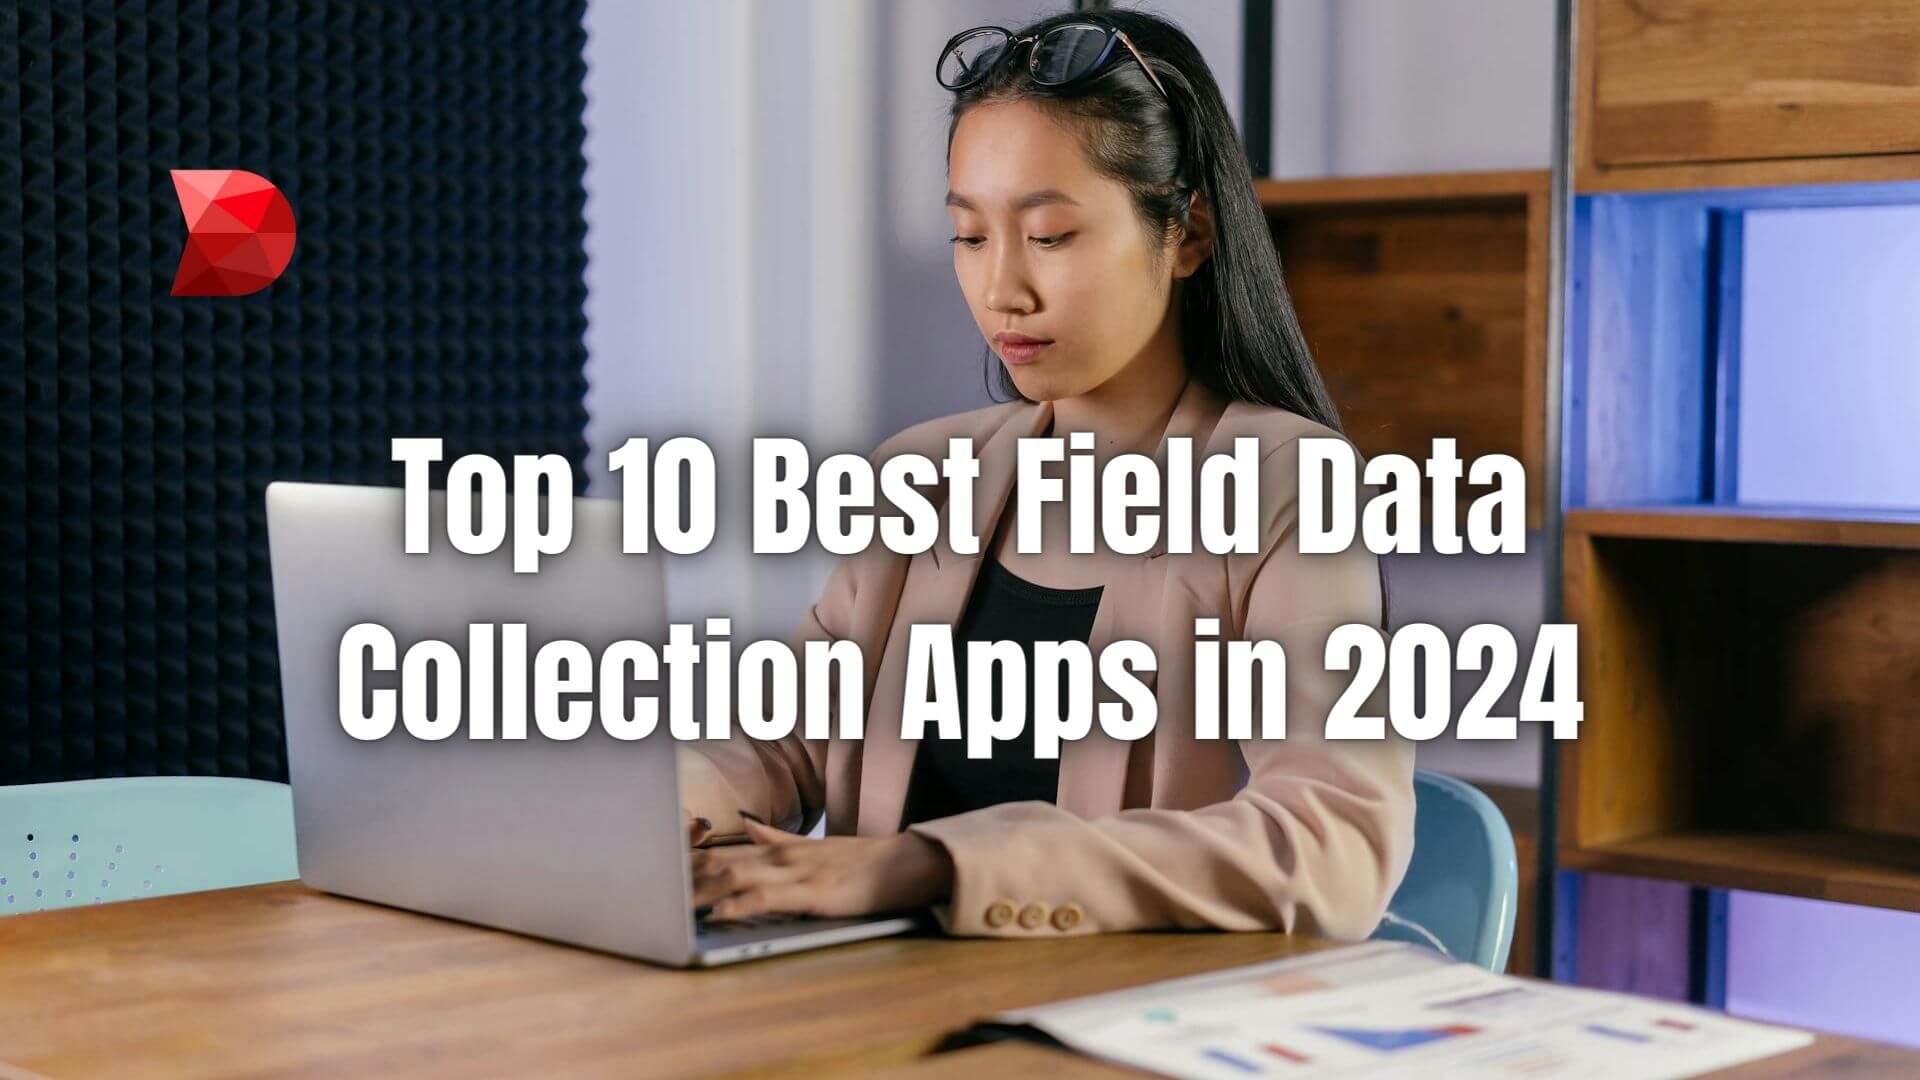 Empower your field data collection app journey in 2024. Explore these top 10 app picks for streamlined processes and reliable results.